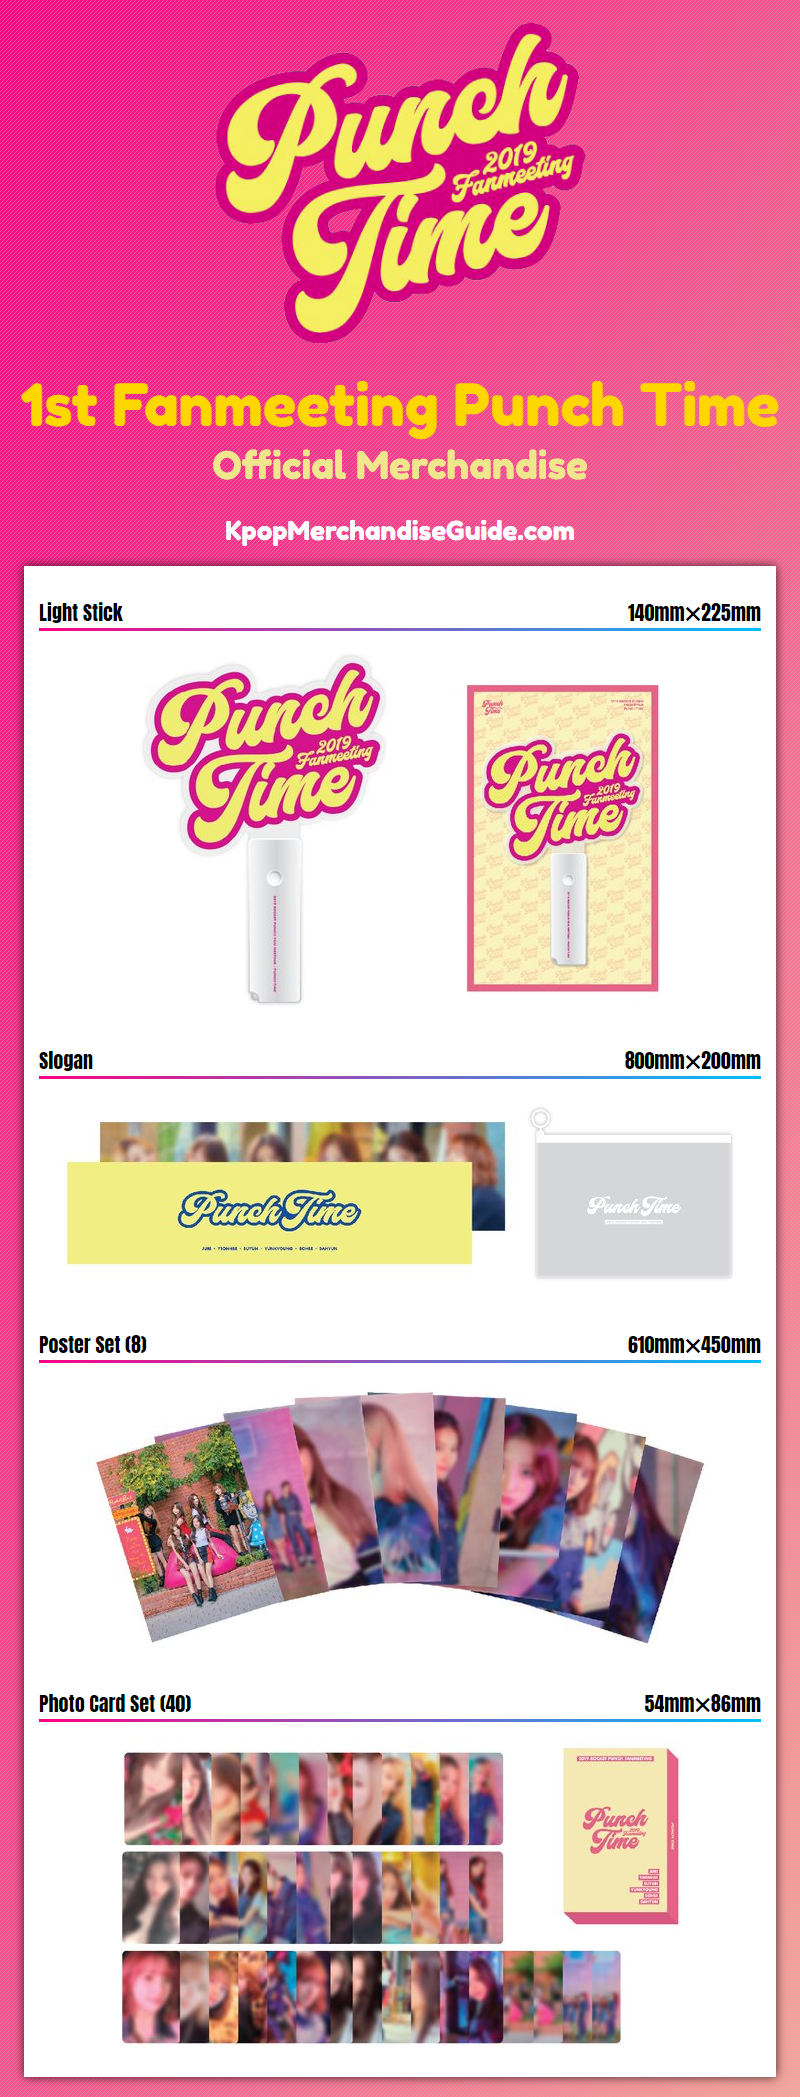 Rocket Punch 1st Fanmeeting Punch Time Merchandise